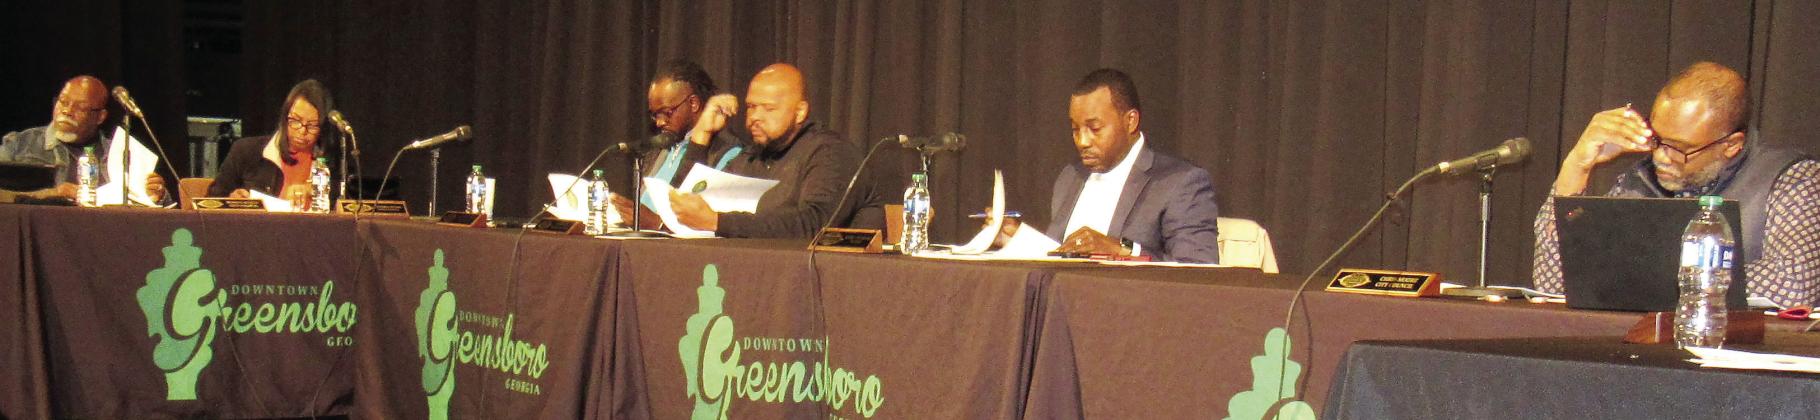 Greensboro City Council met at Festival Hall Tuesday night. (from left) City council members Morris Miller, Cynthia Rivers, Jontaviuis Smith, Mayor Pro-tem David Neal, Mayor Corey Williams and council member Chris Moore. MARK ENGEL/Staff